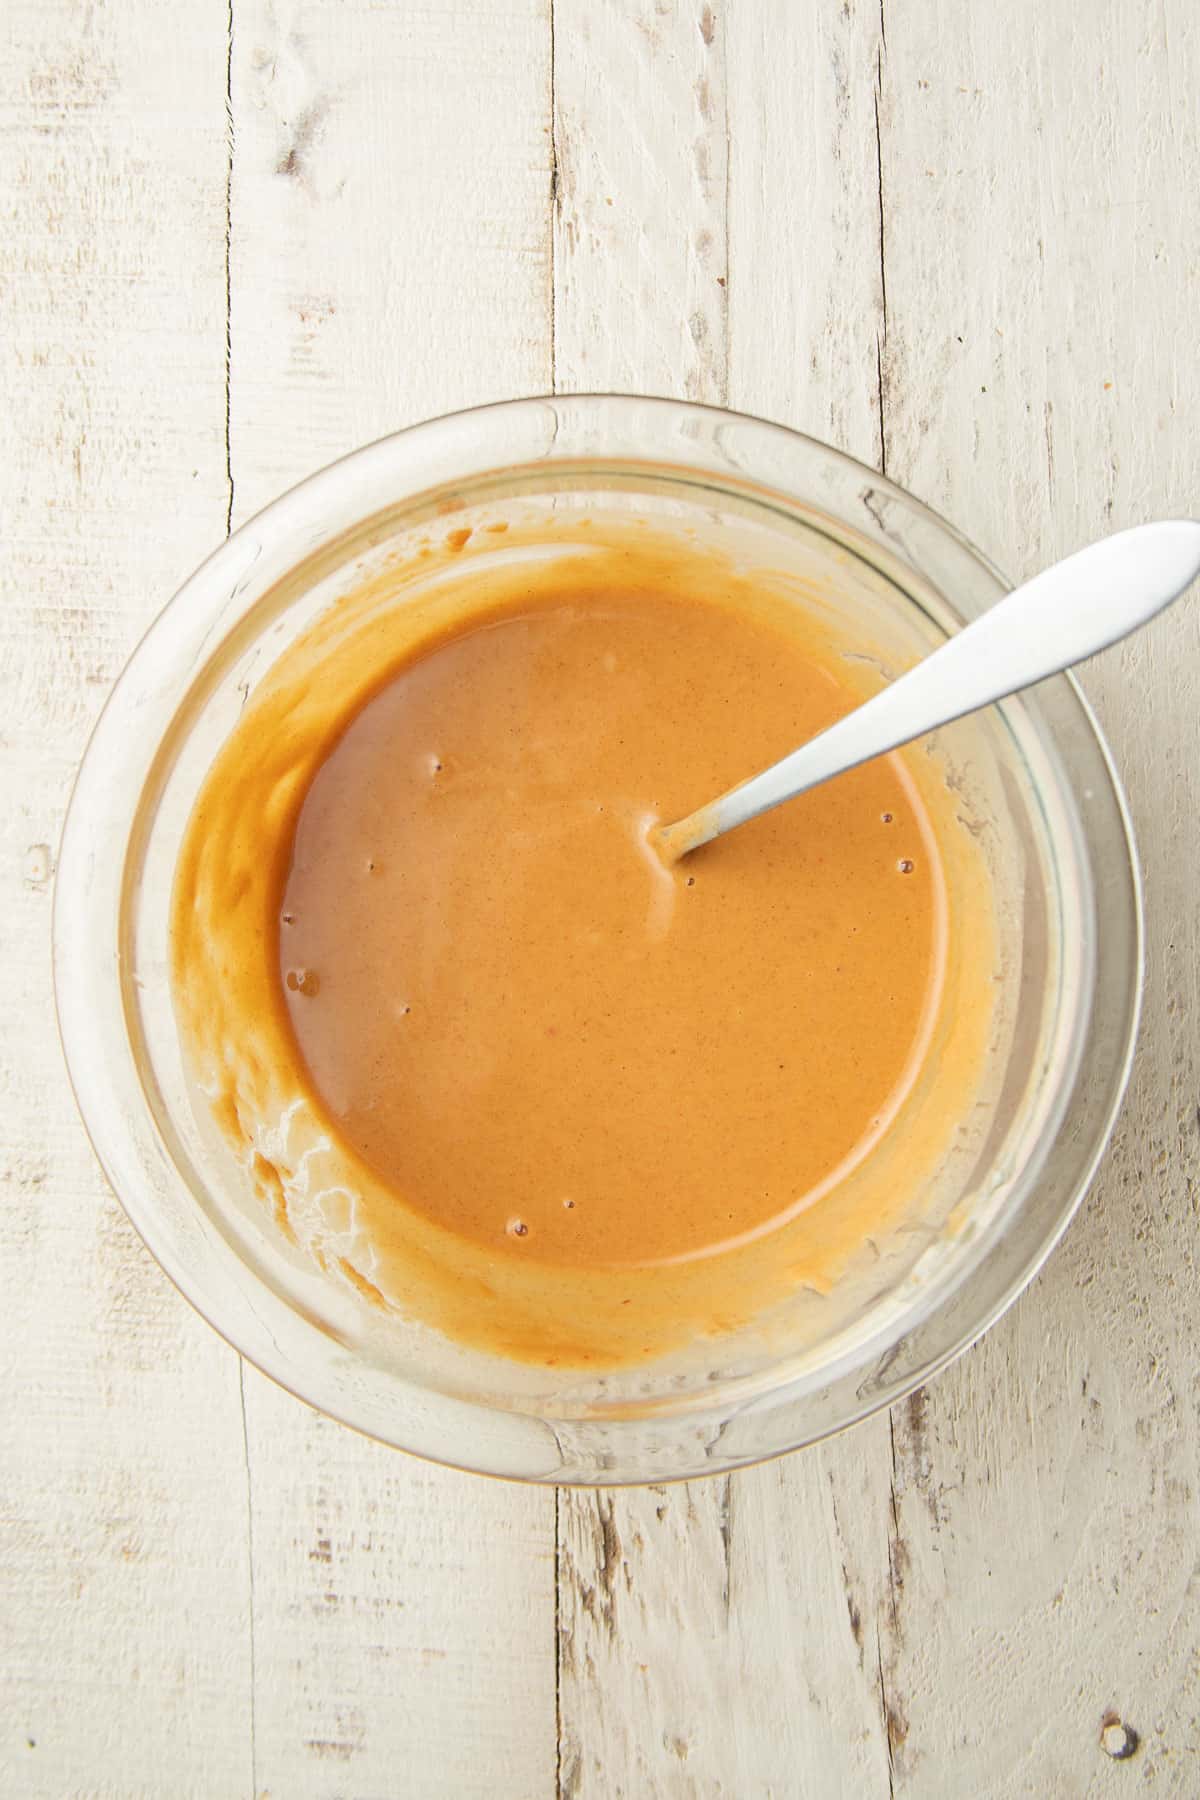 Peanut sauce in a glass bowl with spoon.